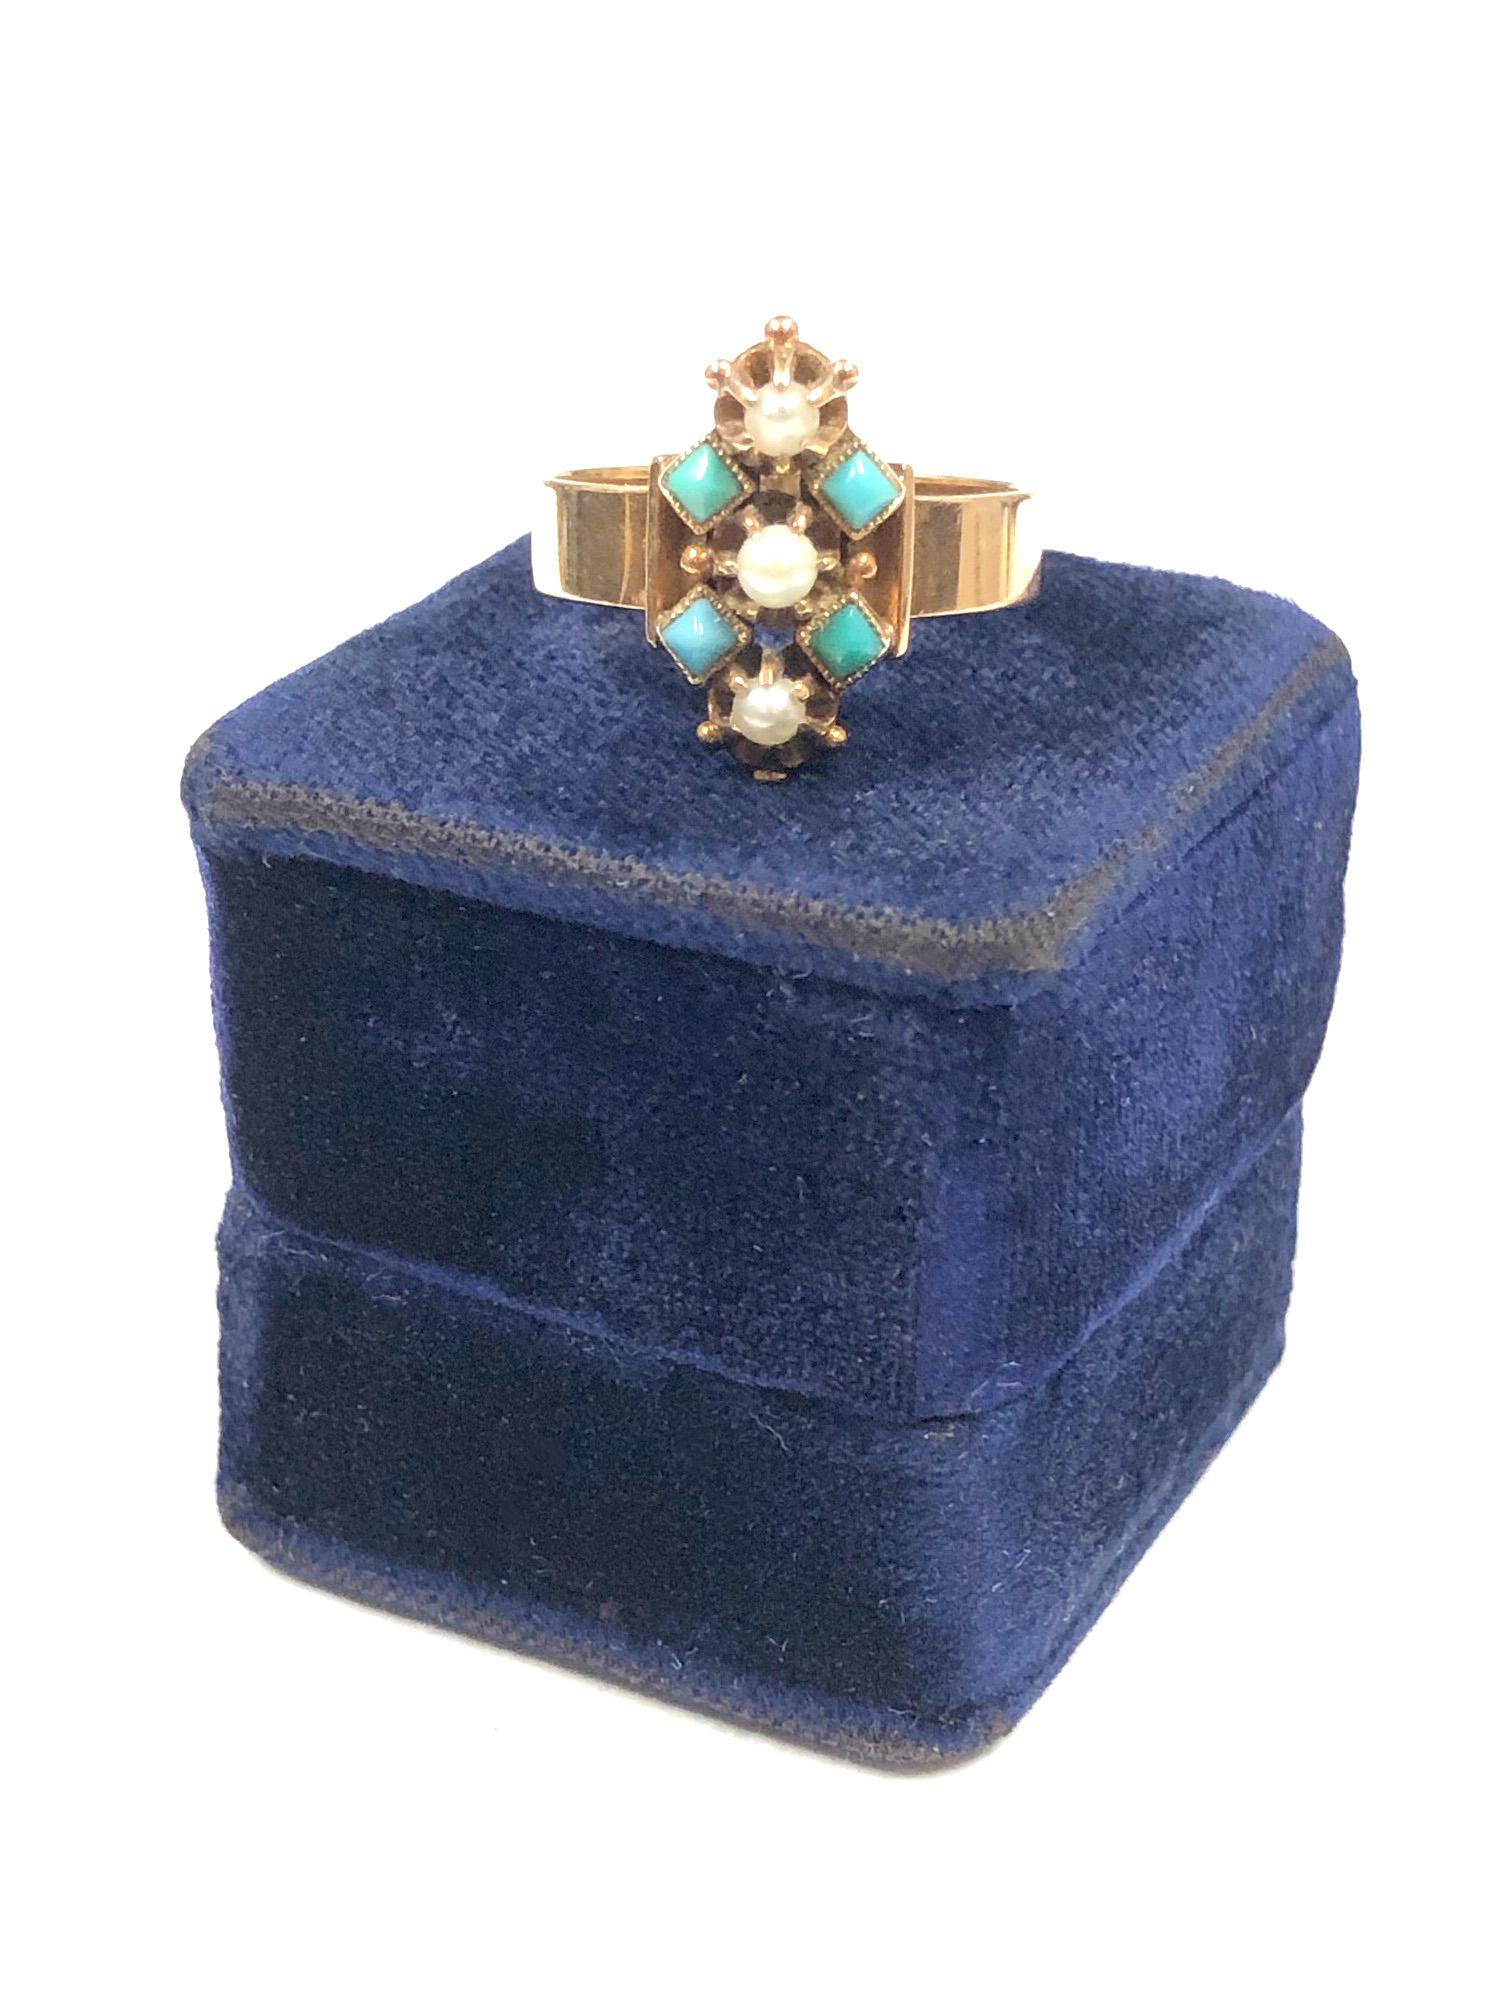 Victorian Gold Pearl and Turquoise Ring in Original Gift Box 1